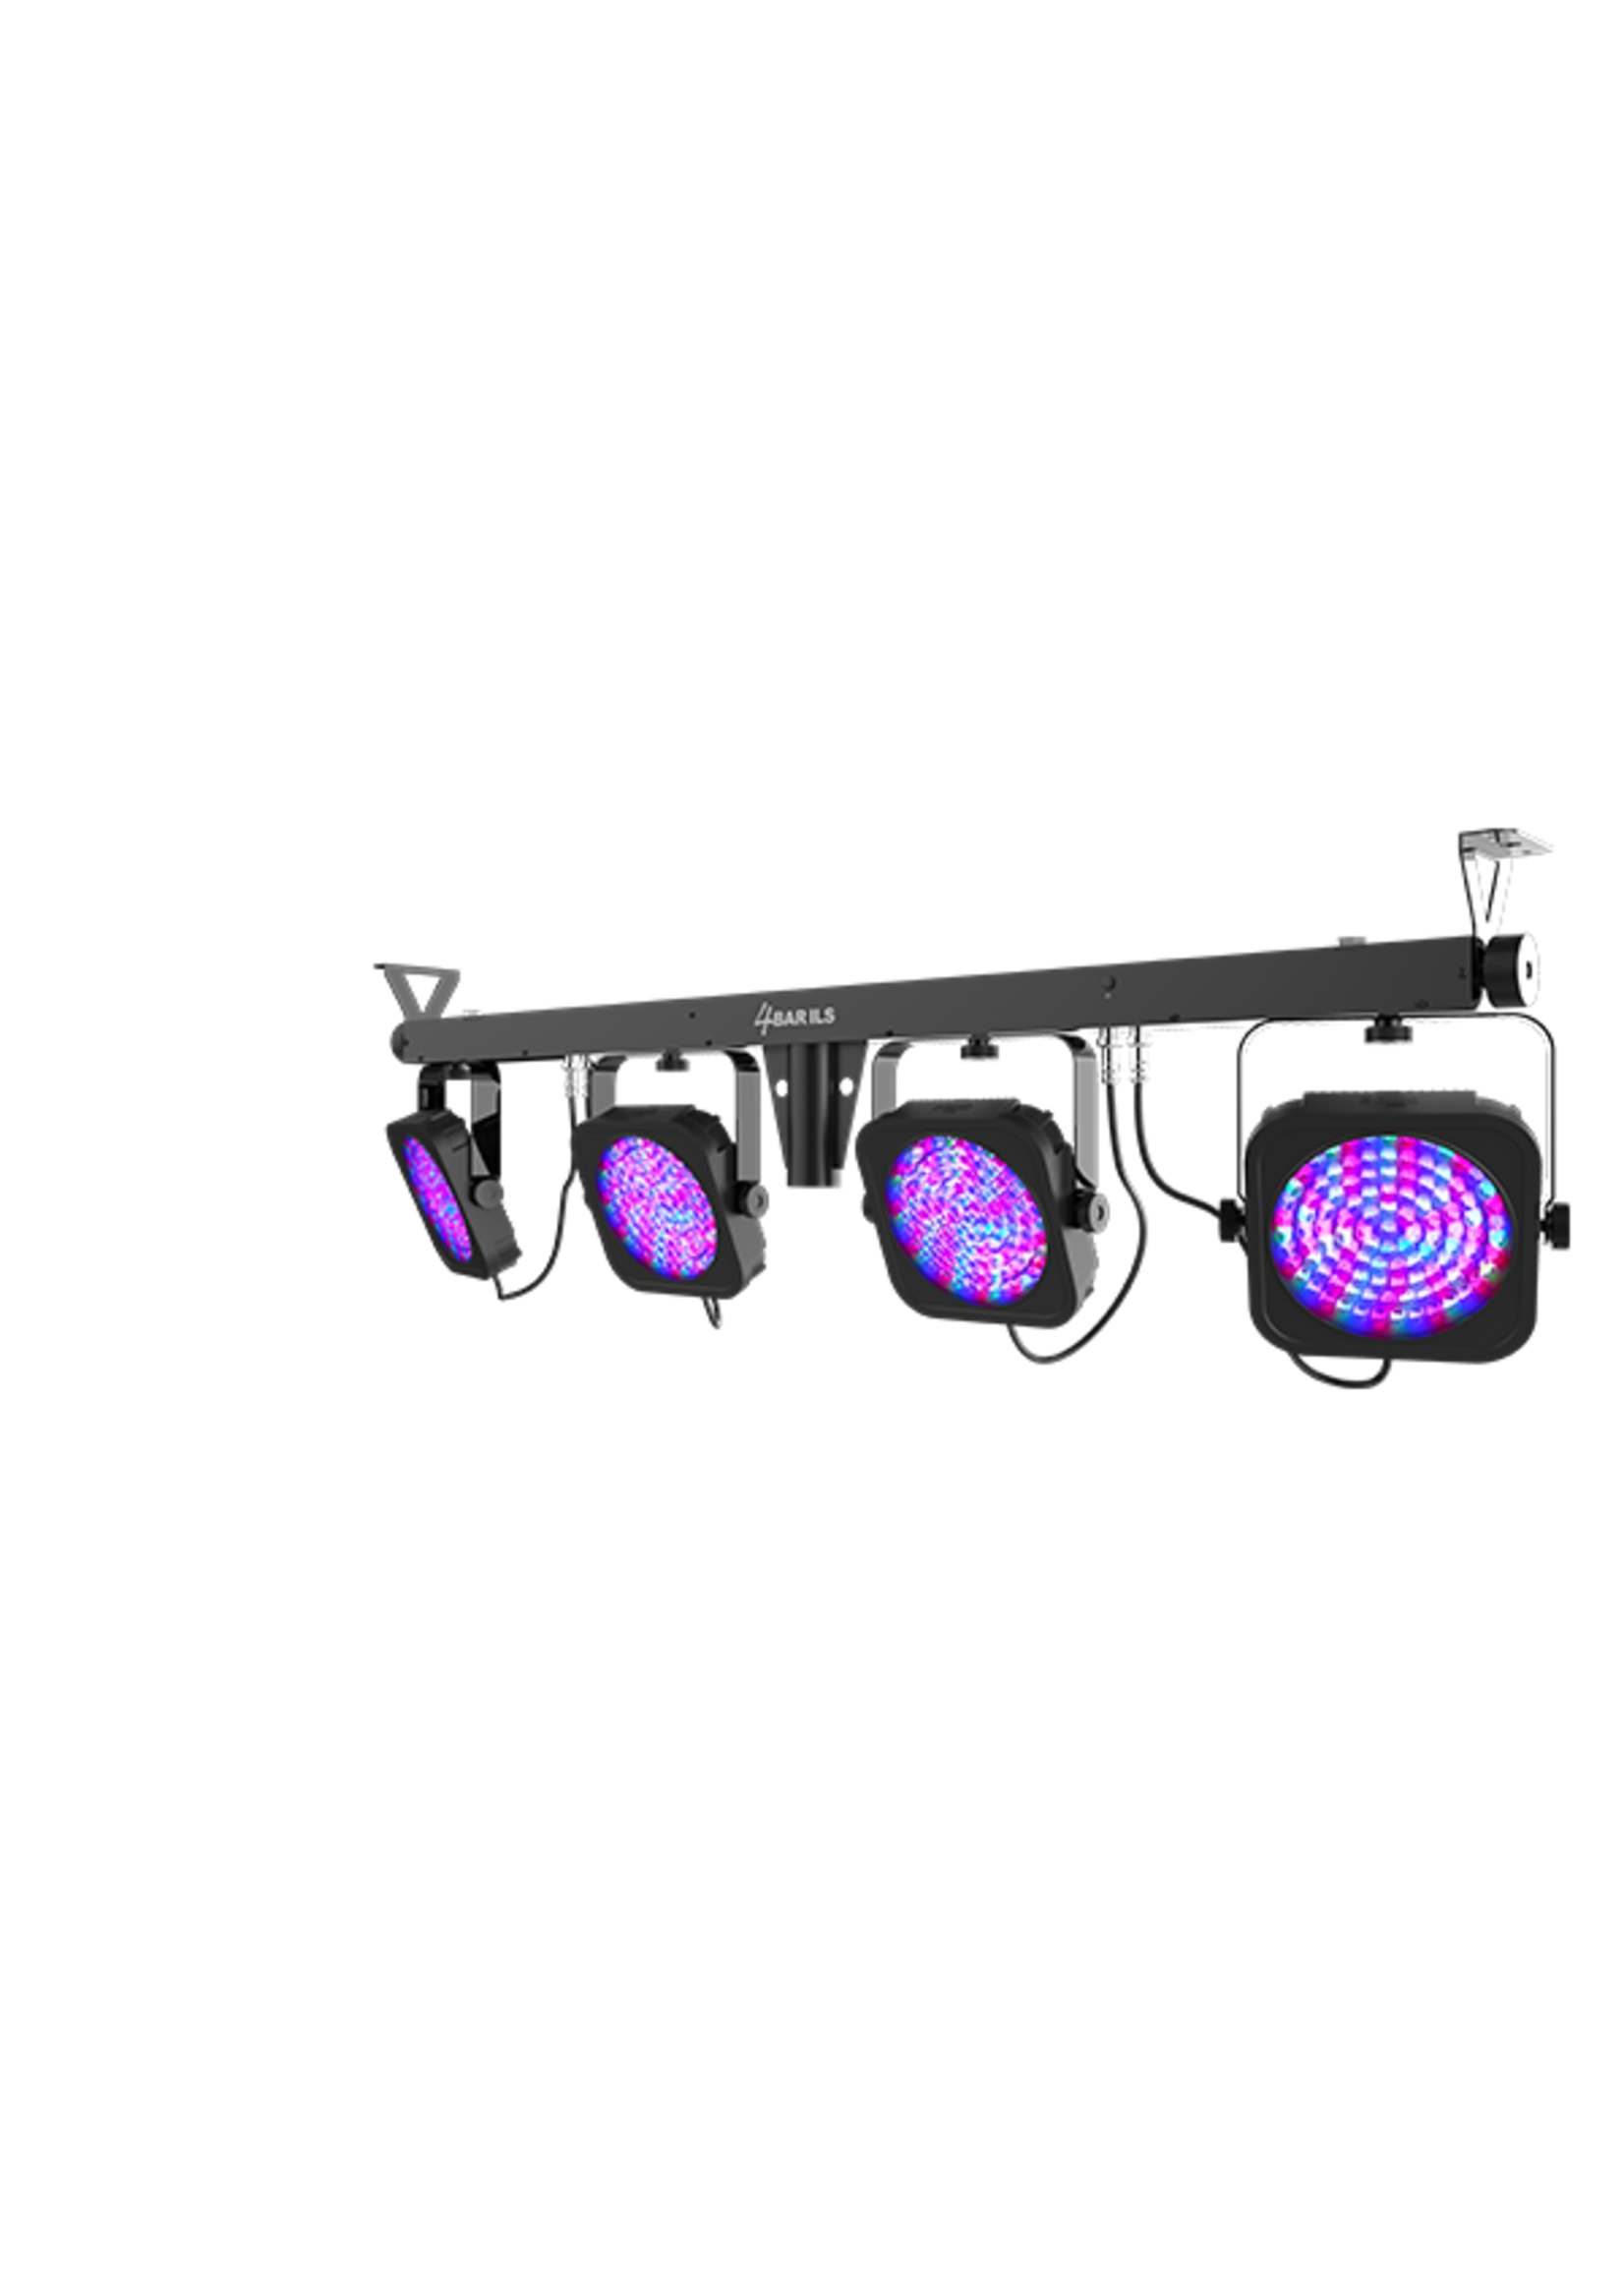 Chauvet DJ Chauvet 4BAR ILS LED Lighting System with Stand and Bag